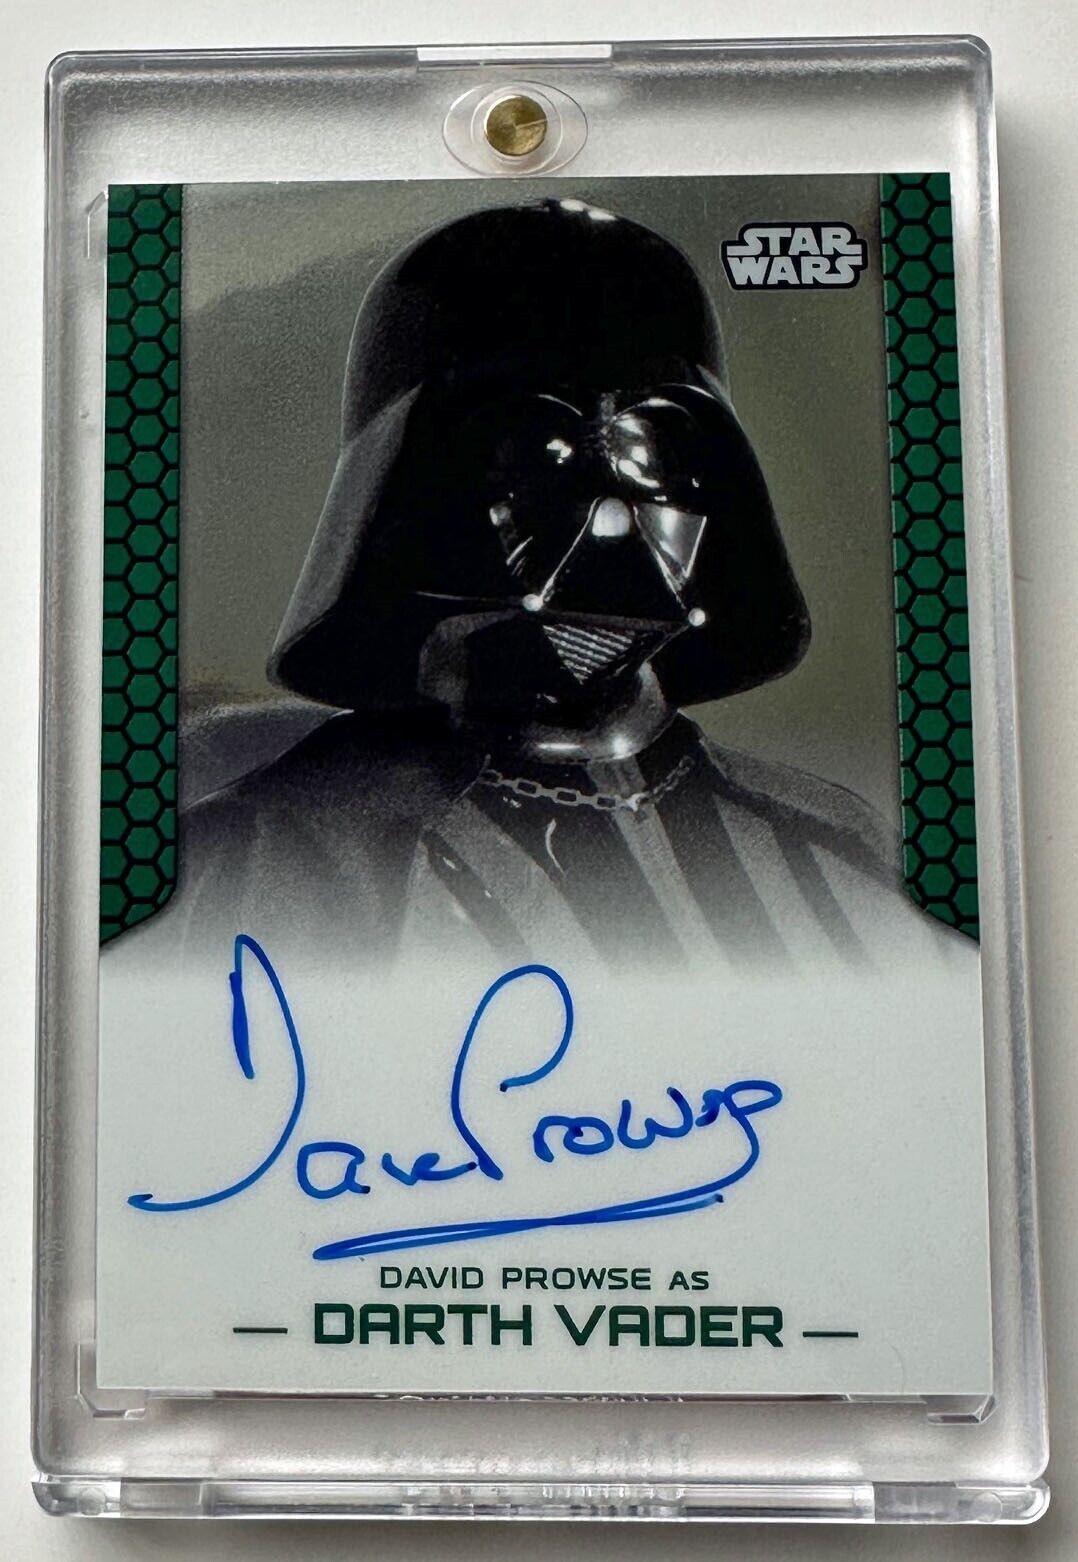 2015 Star Wars Chrome Perspectives Autograph Card Darth Vader David Prowse Auto